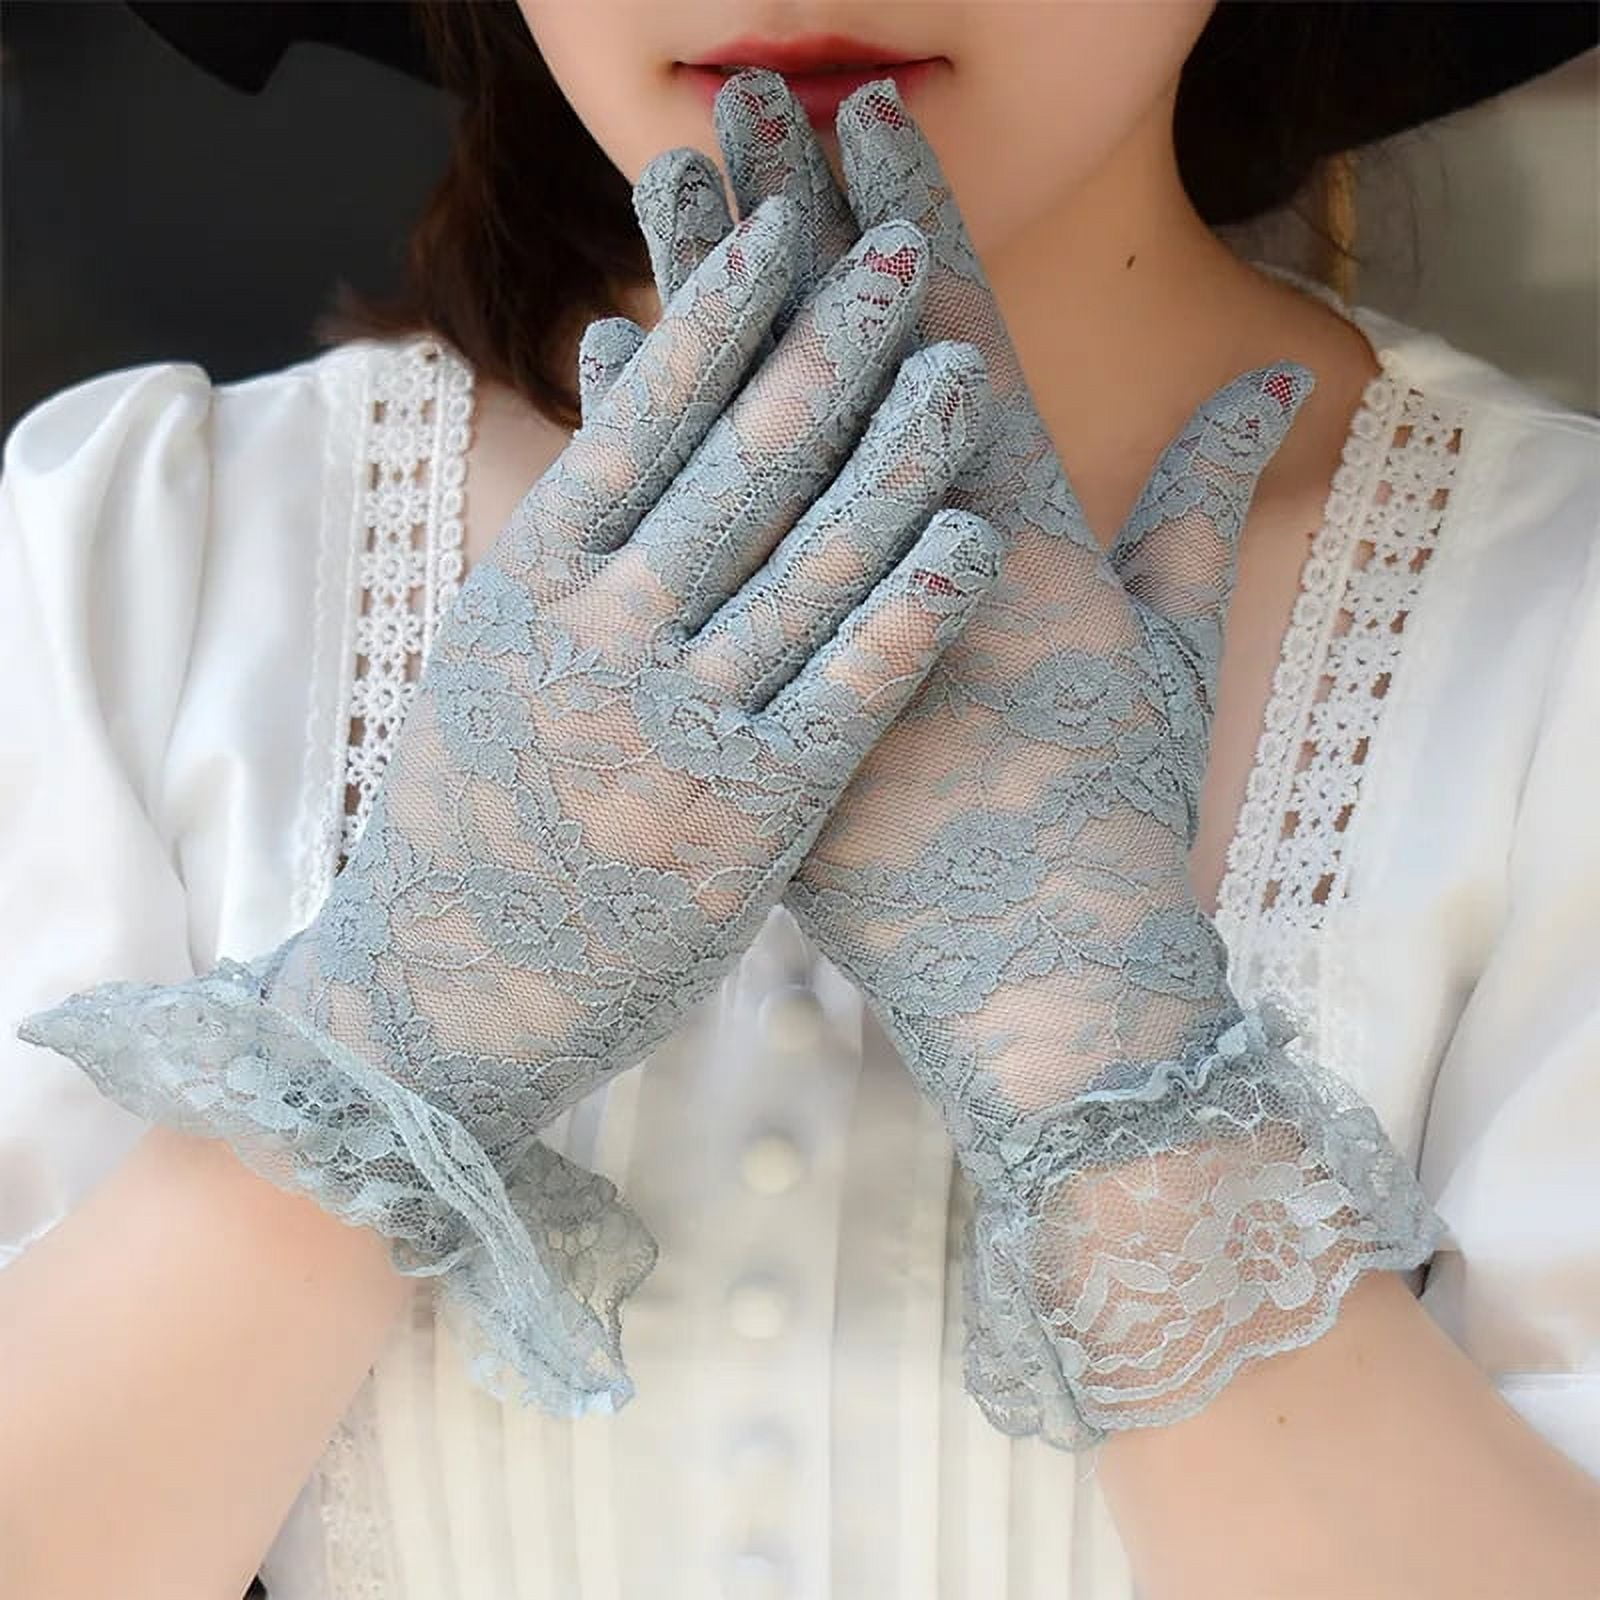 3 Pairs Lace Gloves Women Breathable Sunscreen Full Fingers Mitten